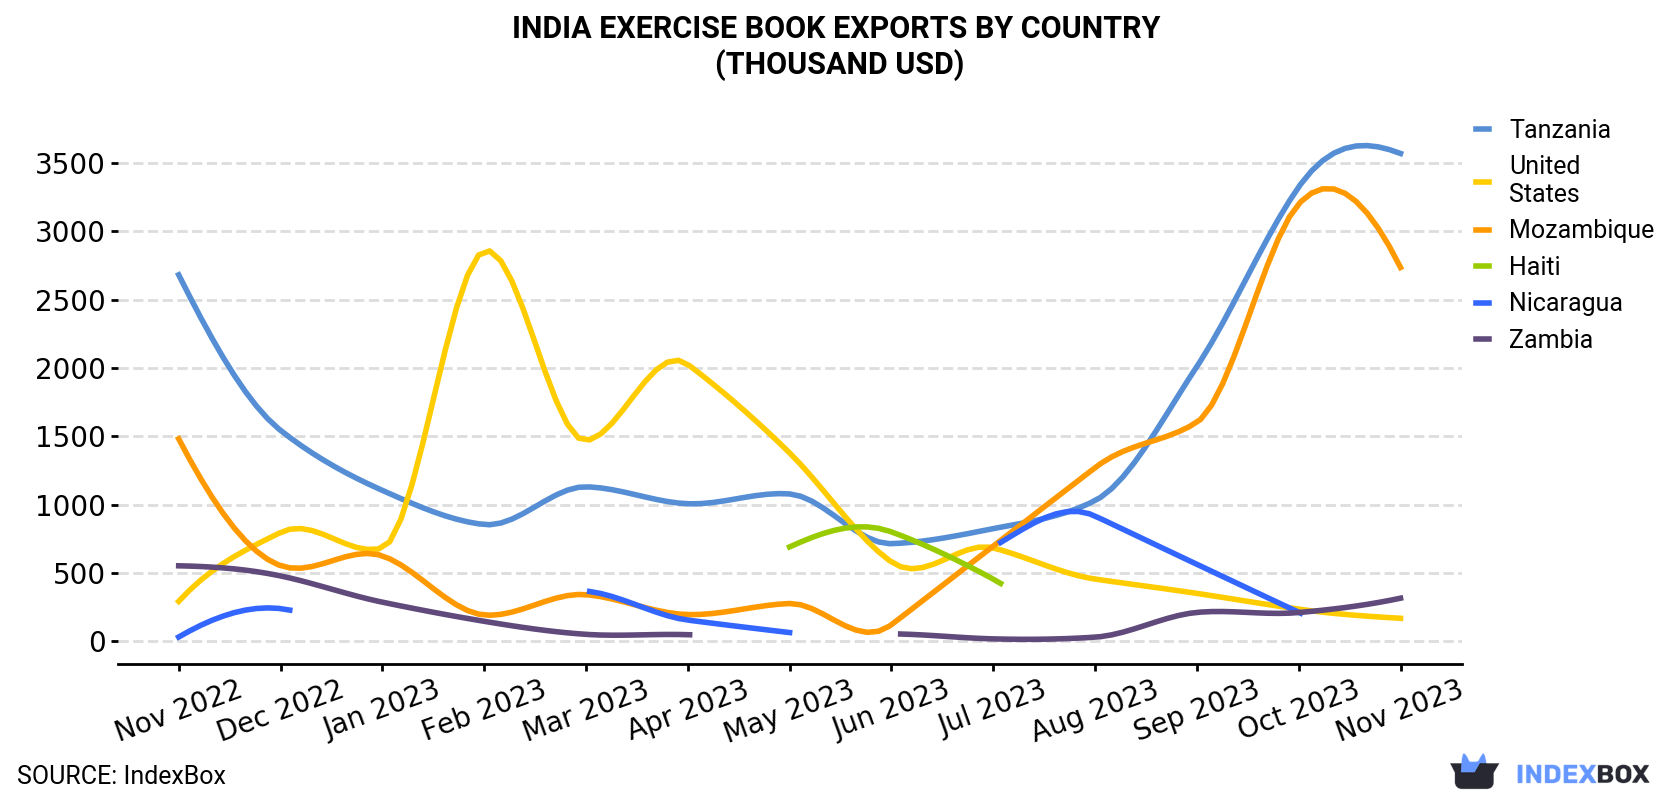 India Exercise Book Exports By Country (Thousand USD)